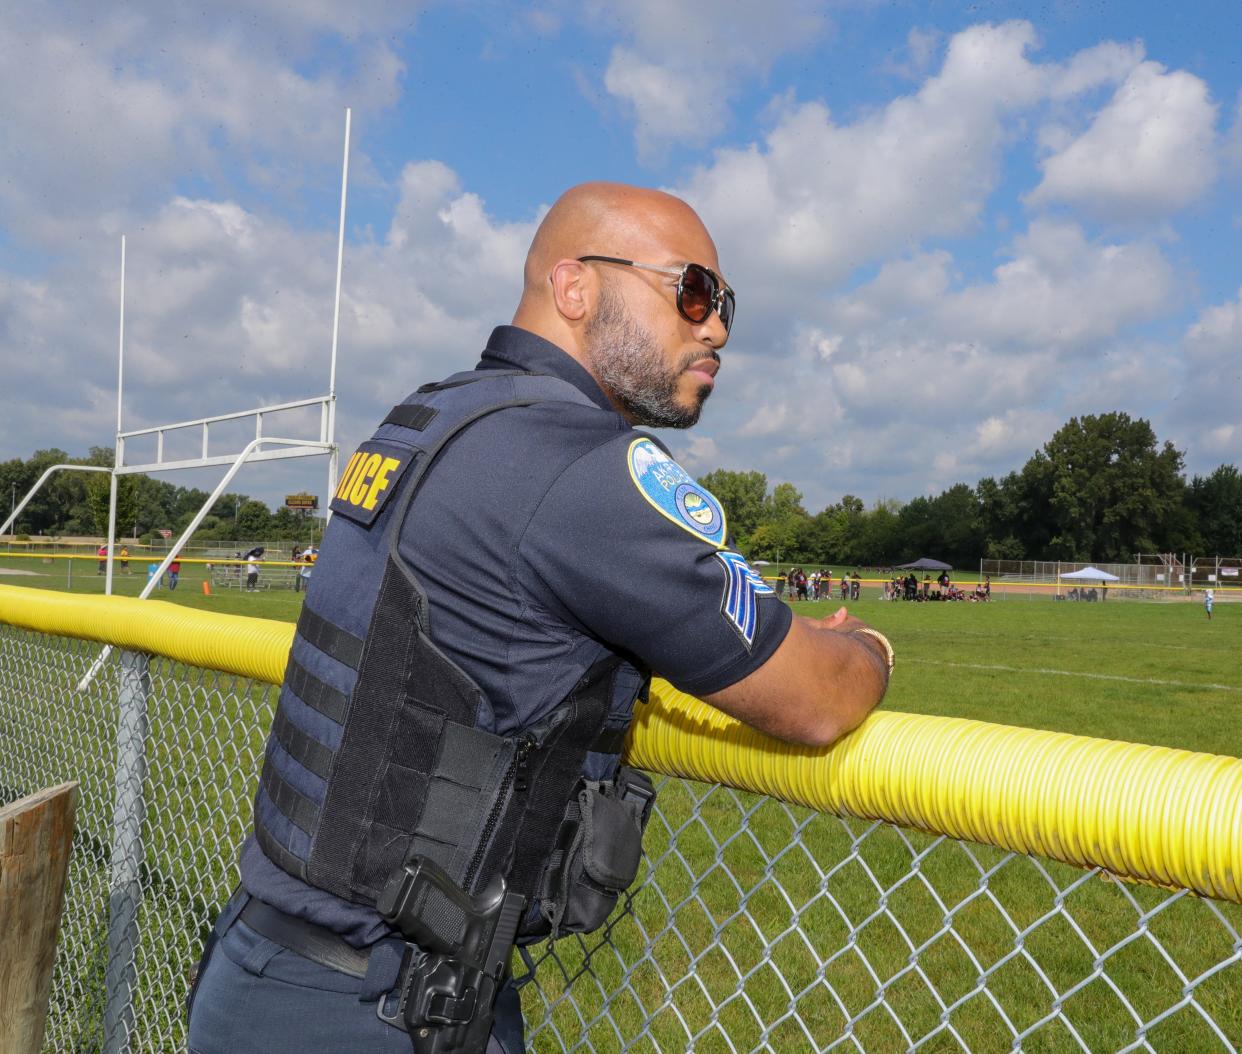 Akron Police Sgt. Mike Murphy Jr. provides security during Sunday's pee wee football games at Erie Island Park.